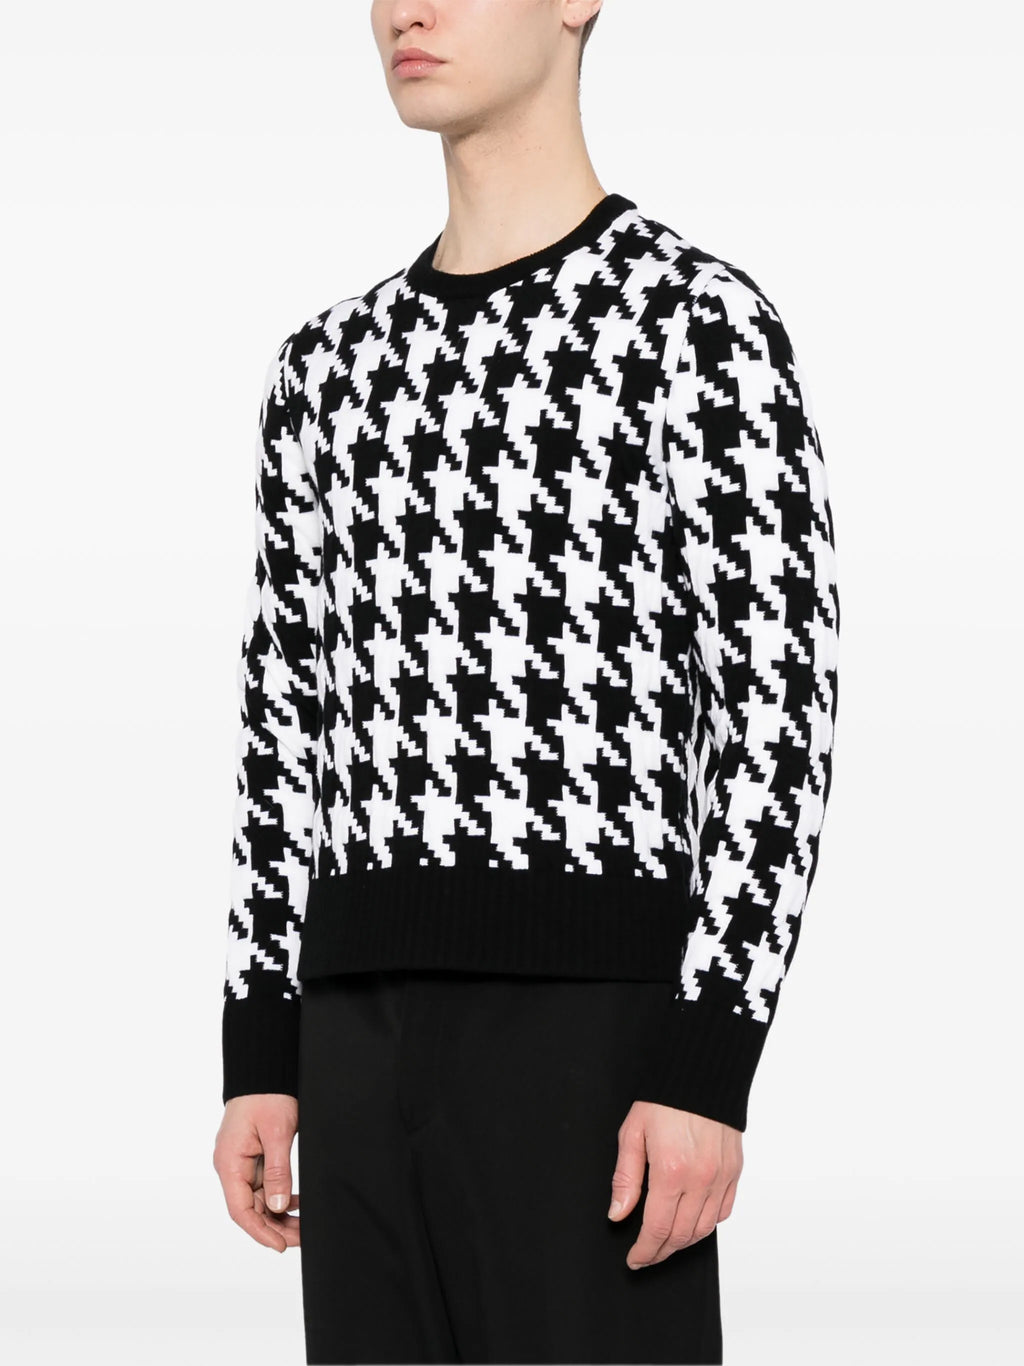 THOM BROWNE Men Pullover W/ Houndstooth Quilted Jacquard in Merino Wool